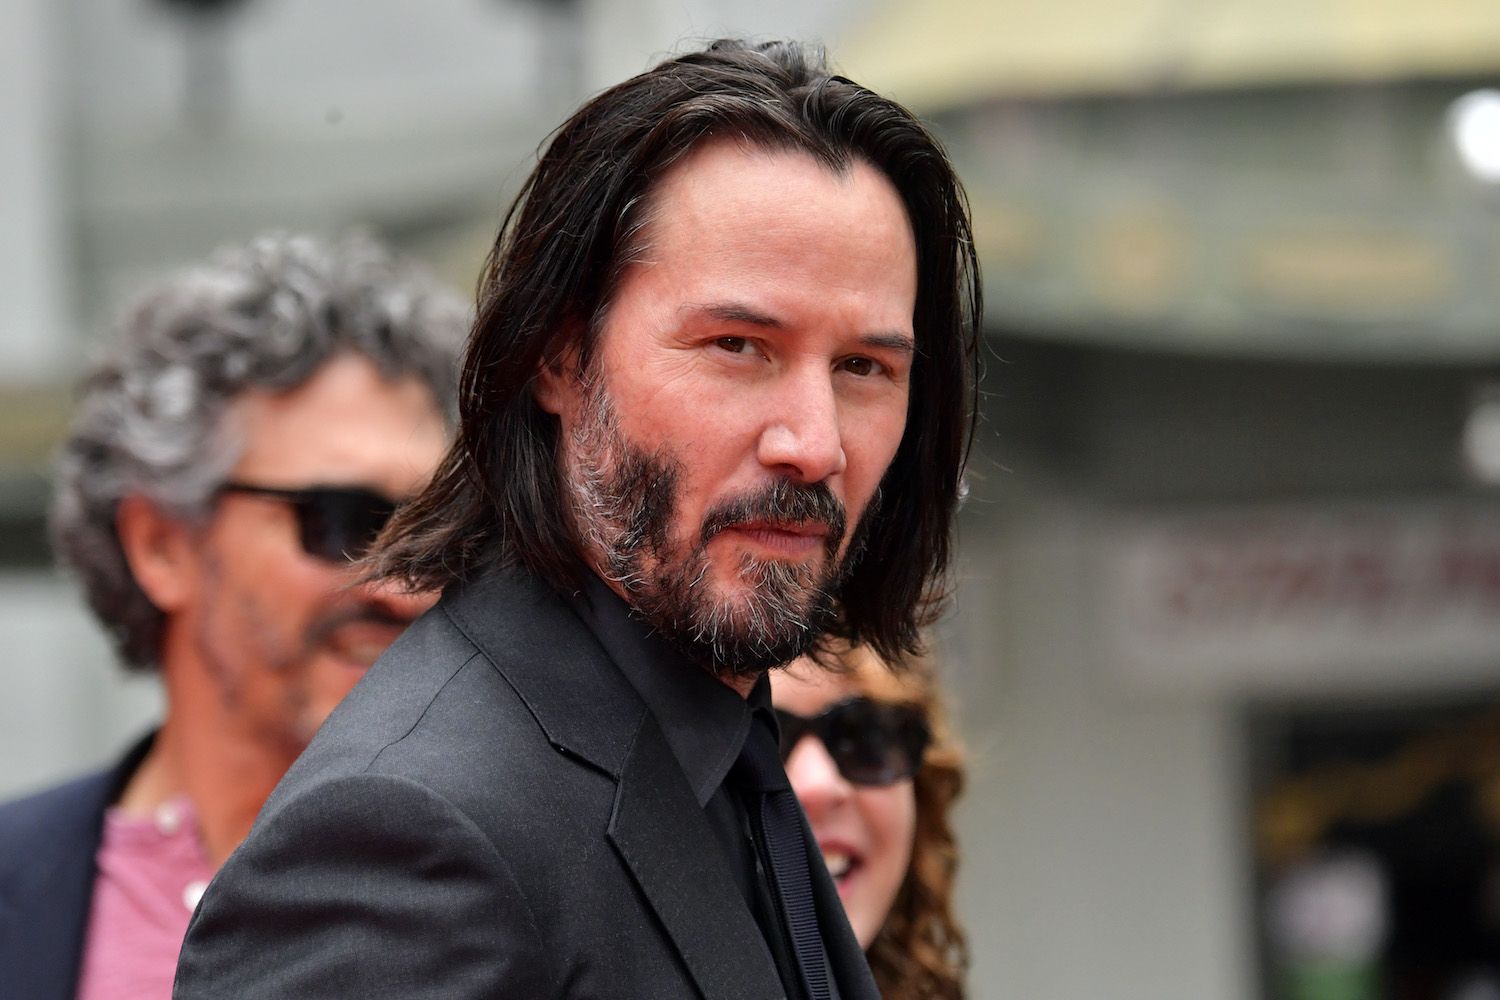 Keanu Reeves on Working with Ex Sofia Coppola on New Collab